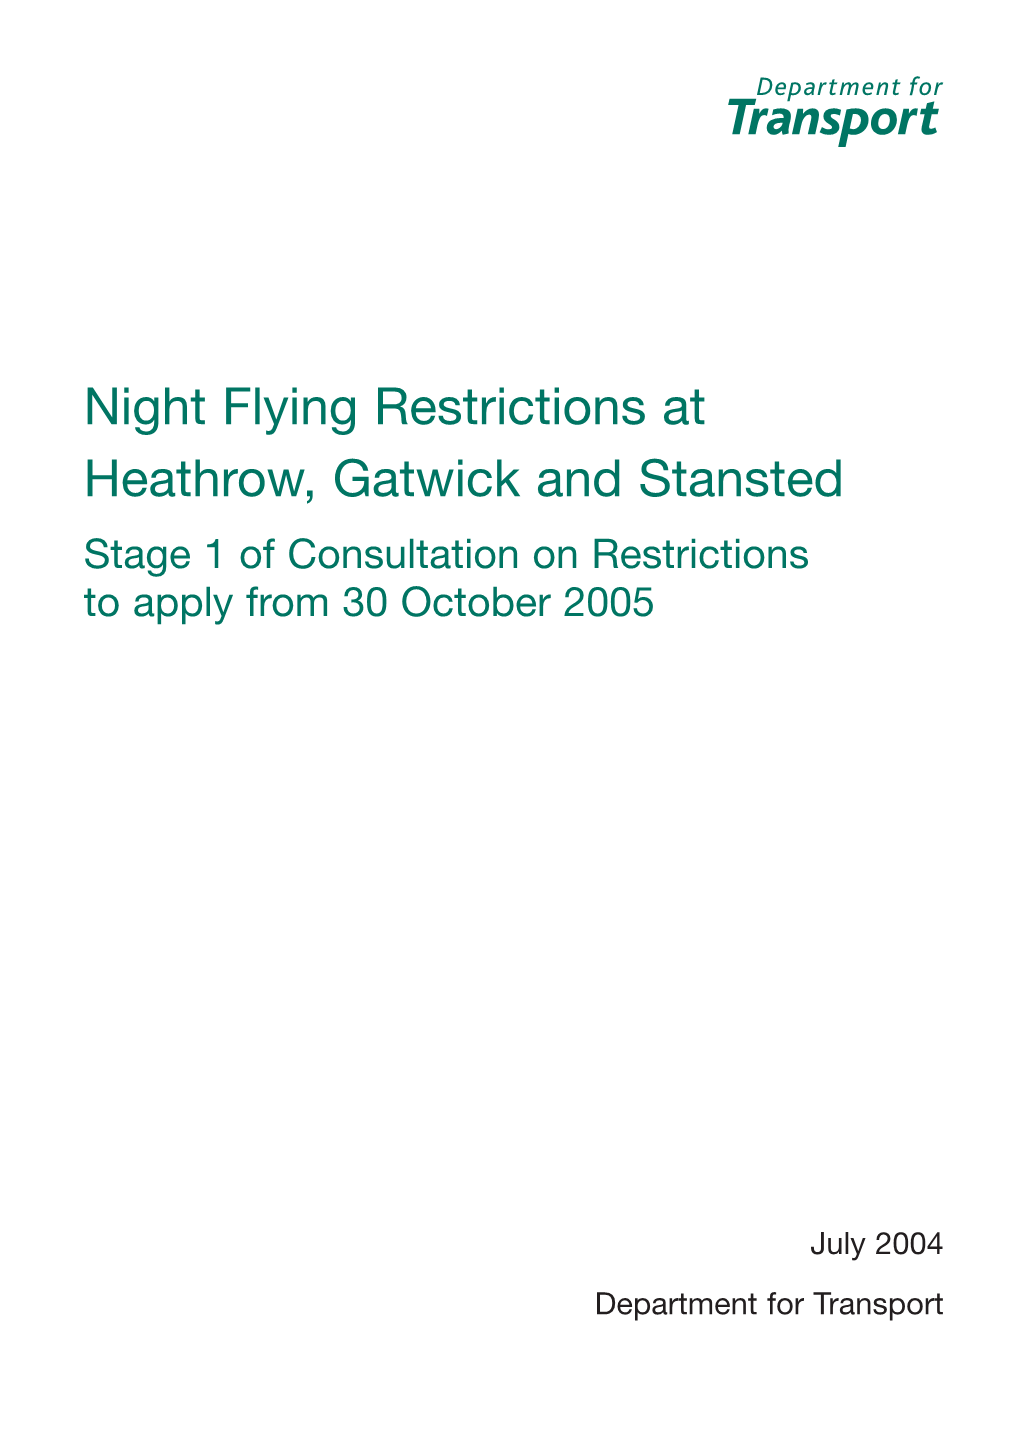 Night Flying Restrictions at Heathrow, Gatwick and Stansted Stage 1 of Consultation on Restrictions to Apply from 30 October 2005